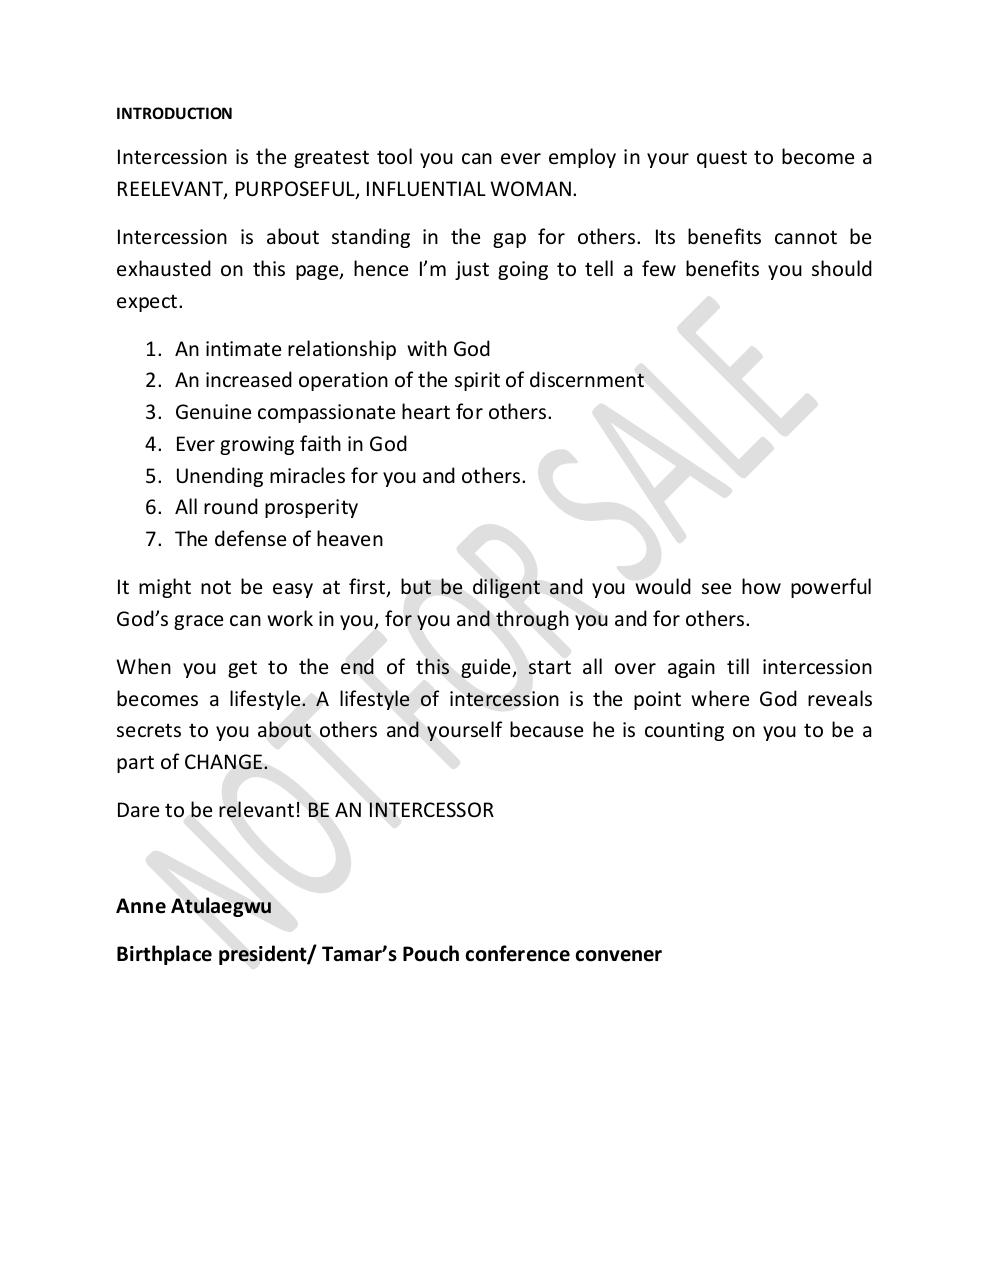 Prayer guide for women by Anne Atulaegwu.pdf - page 4/12